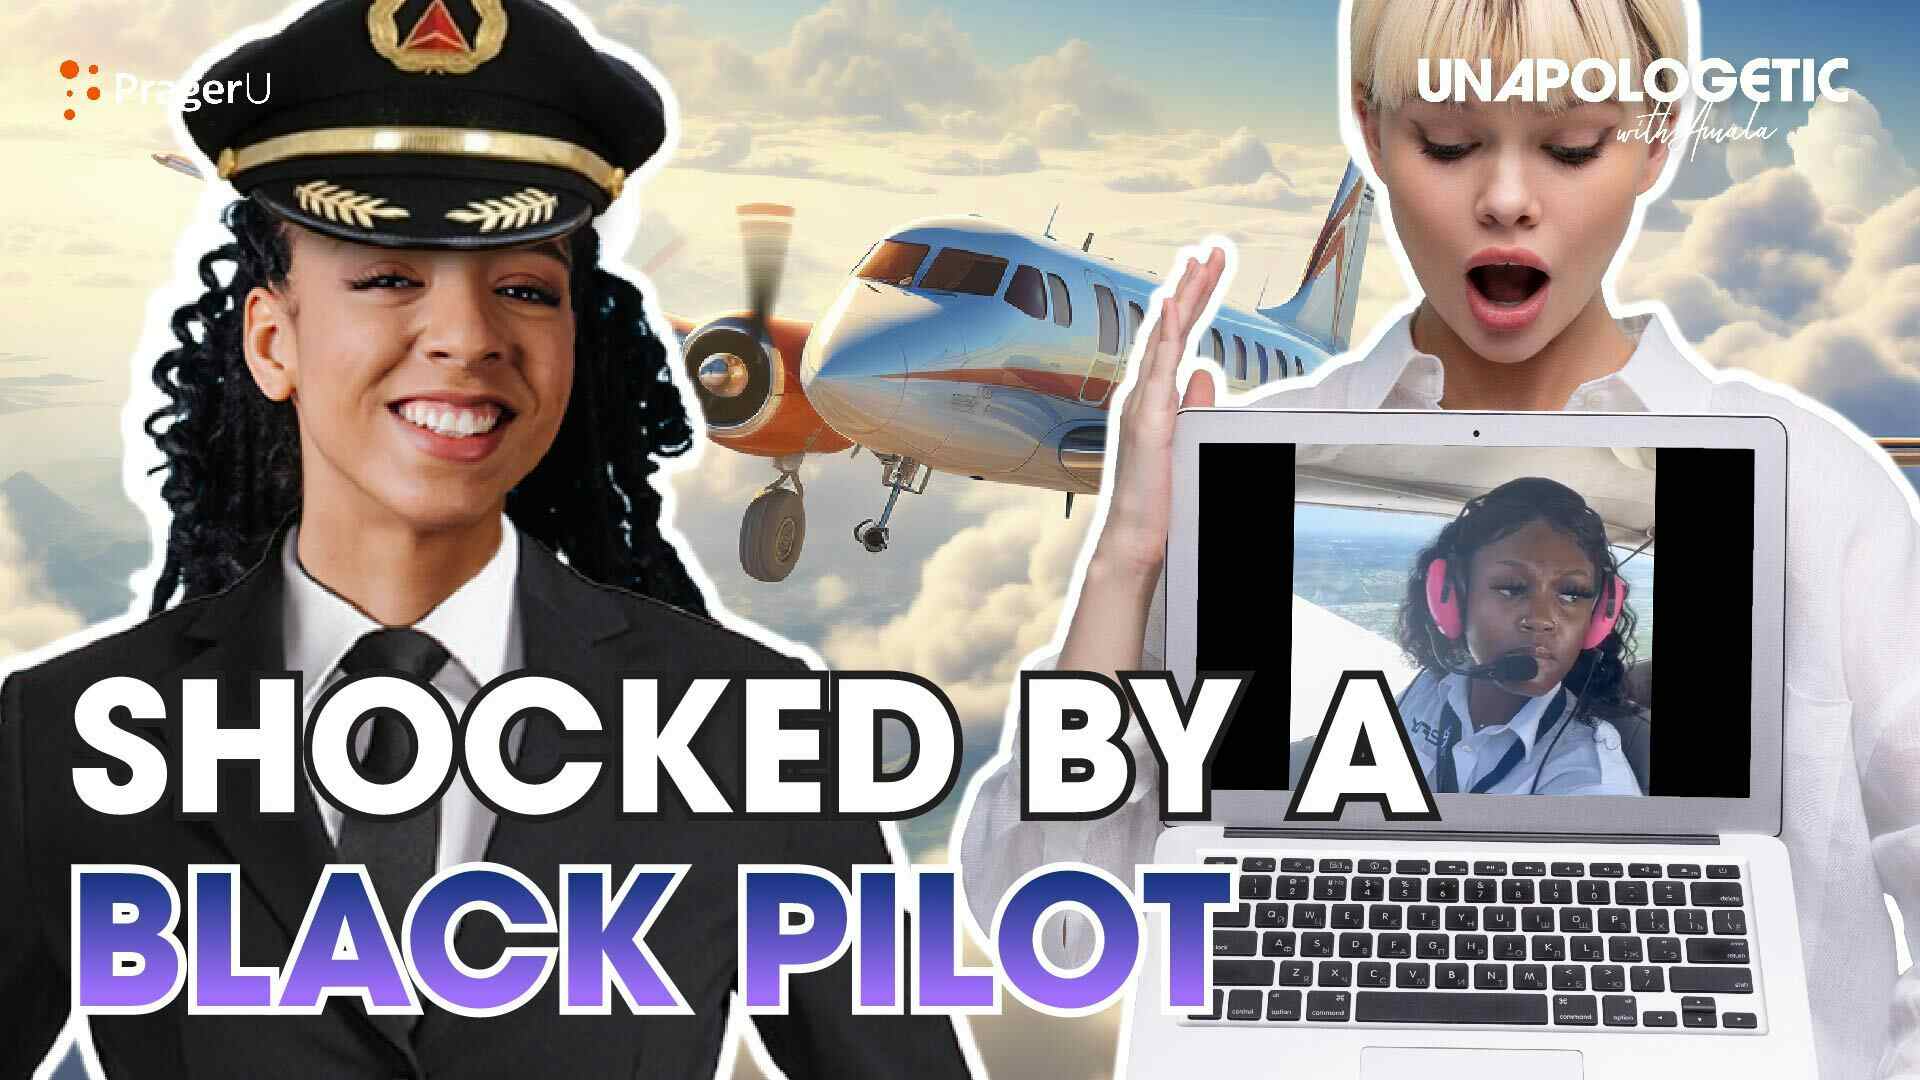 The Internet Is Shocked by a Black Female Pilot